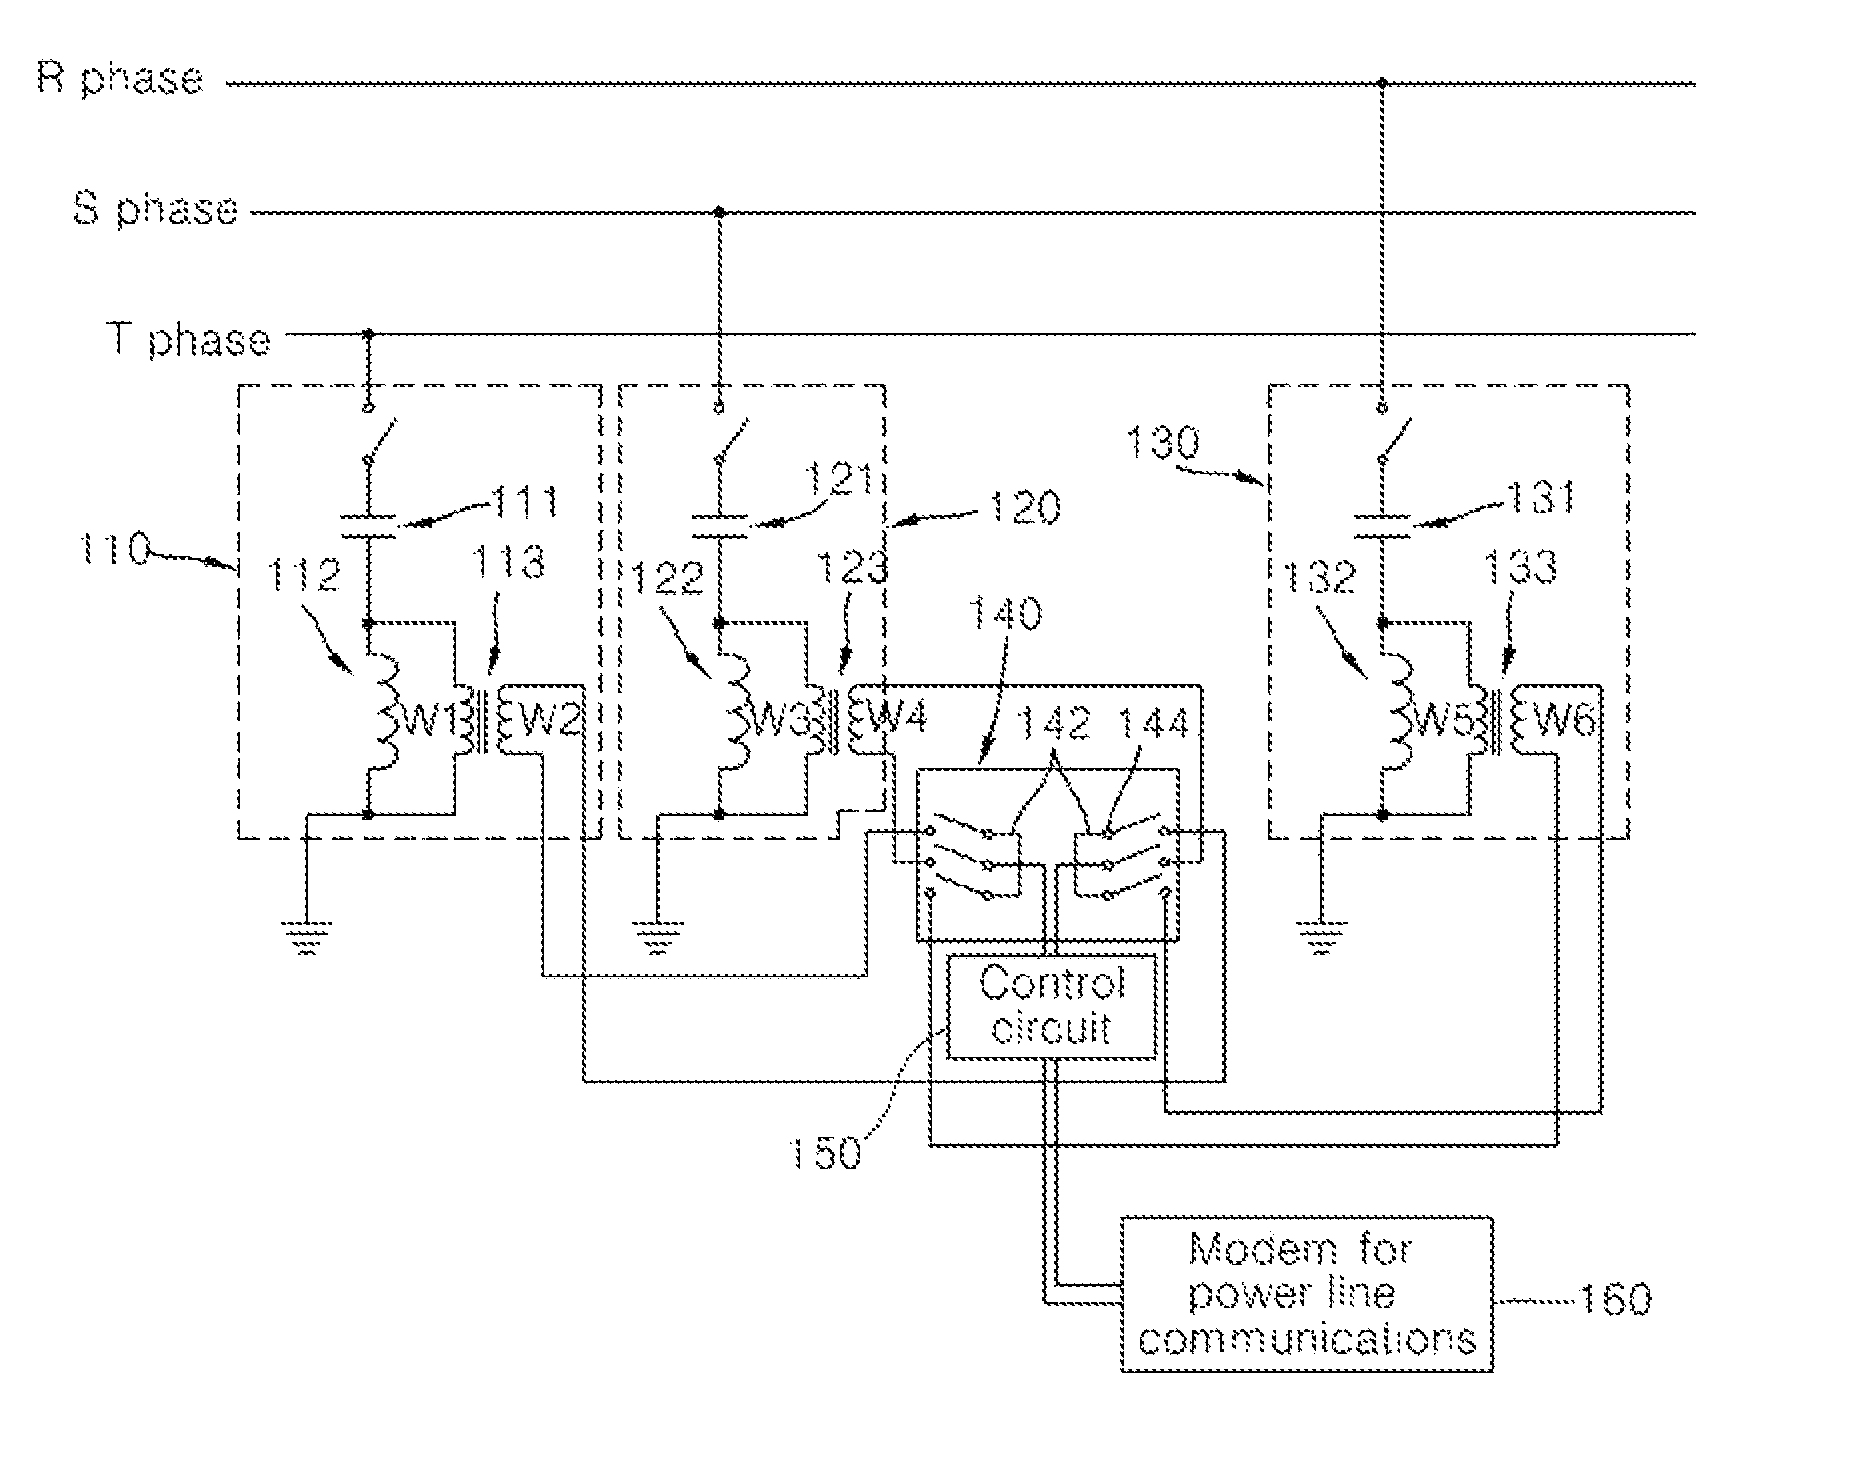 Signal coupling apparatus for power line communications using a three-phase four-wire power line